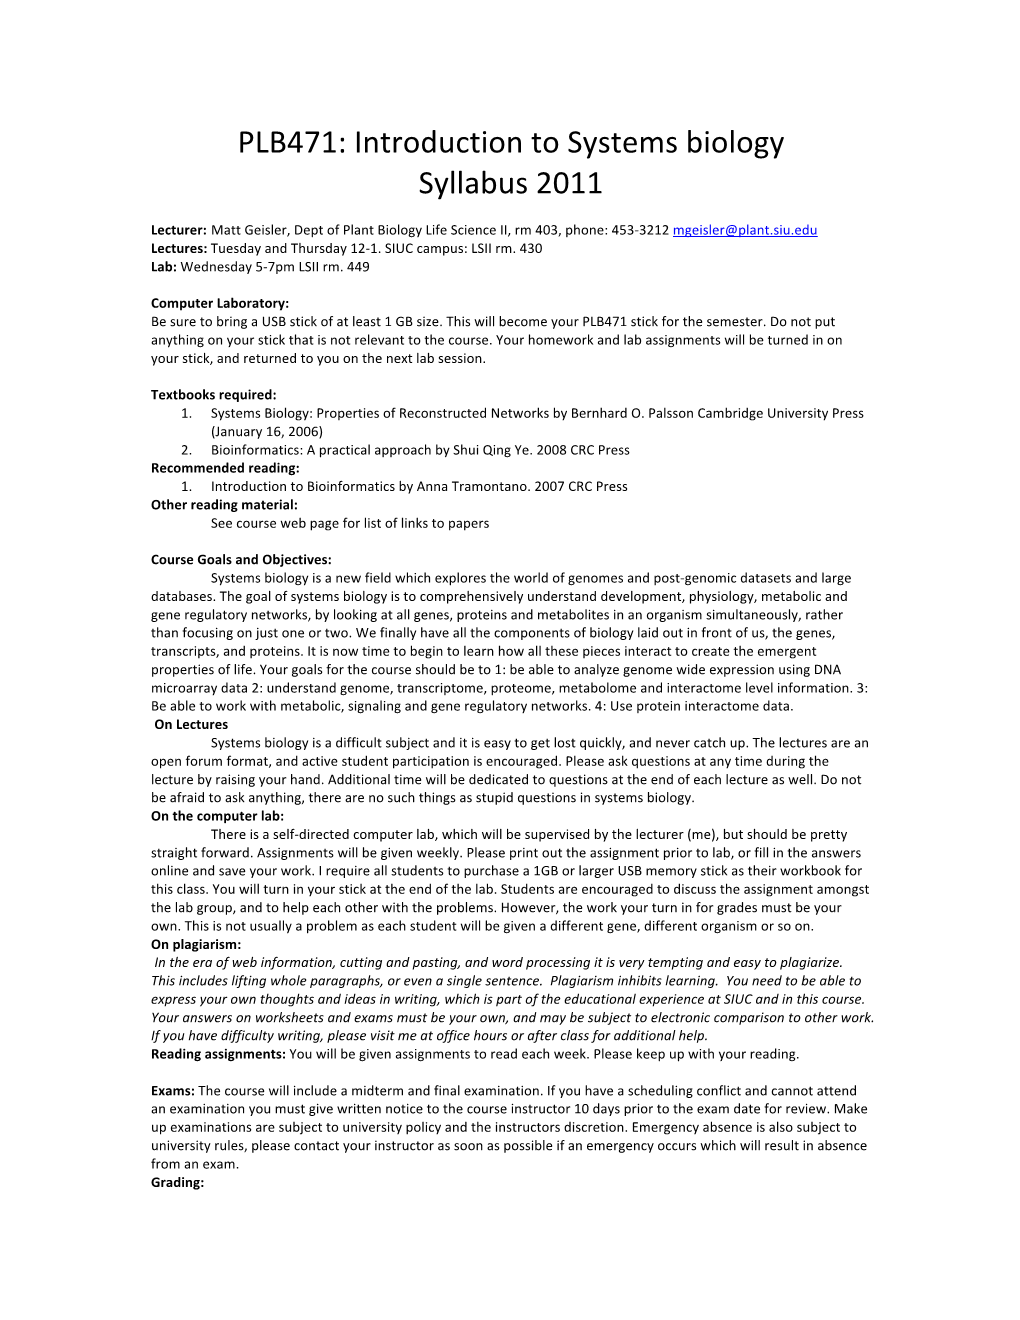 PLB471: Introduction to Systems Biology Syllabus 2011